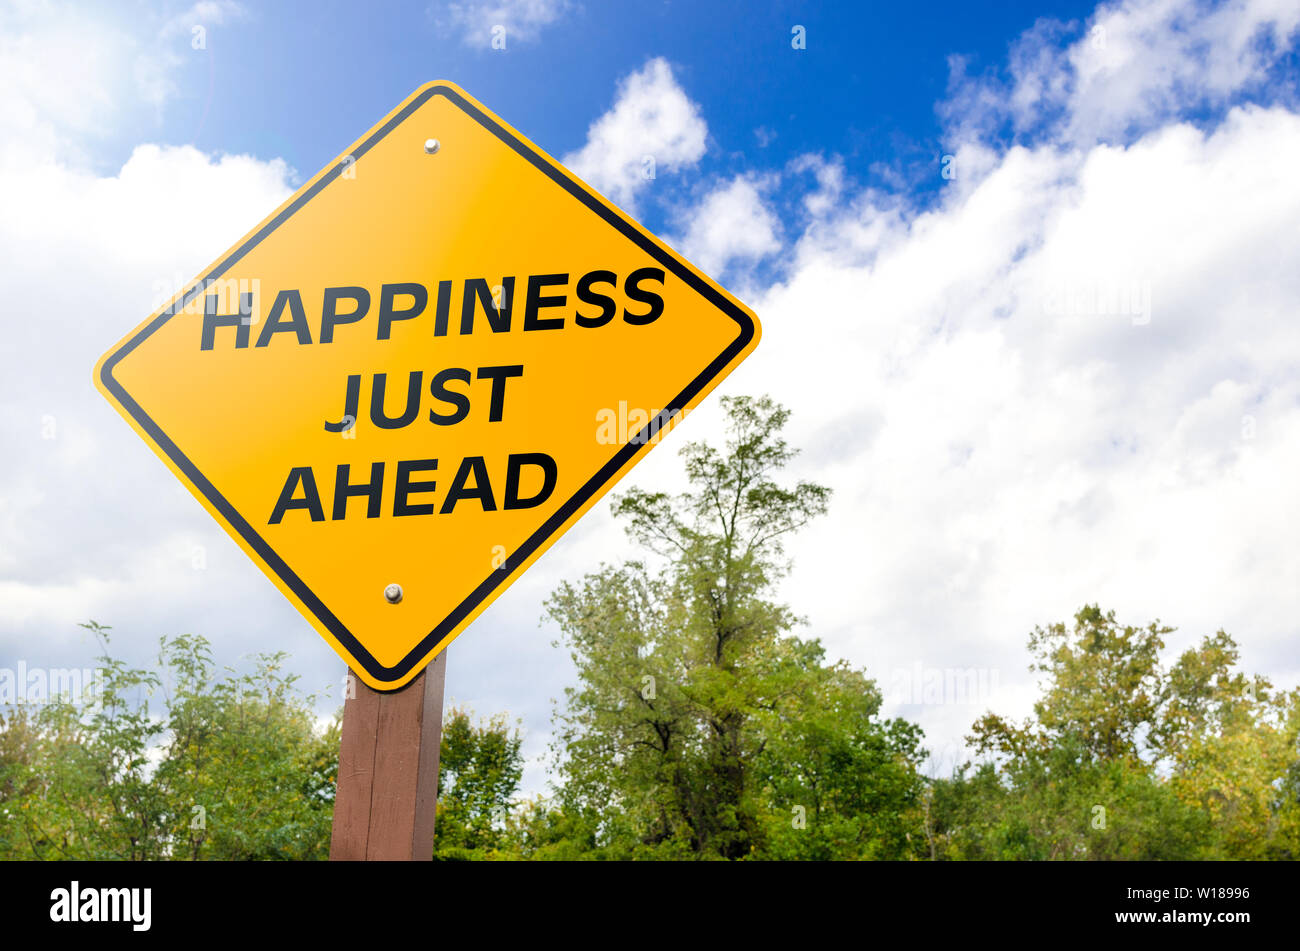 Happiness just ahead conceptual road sign Stock Photo